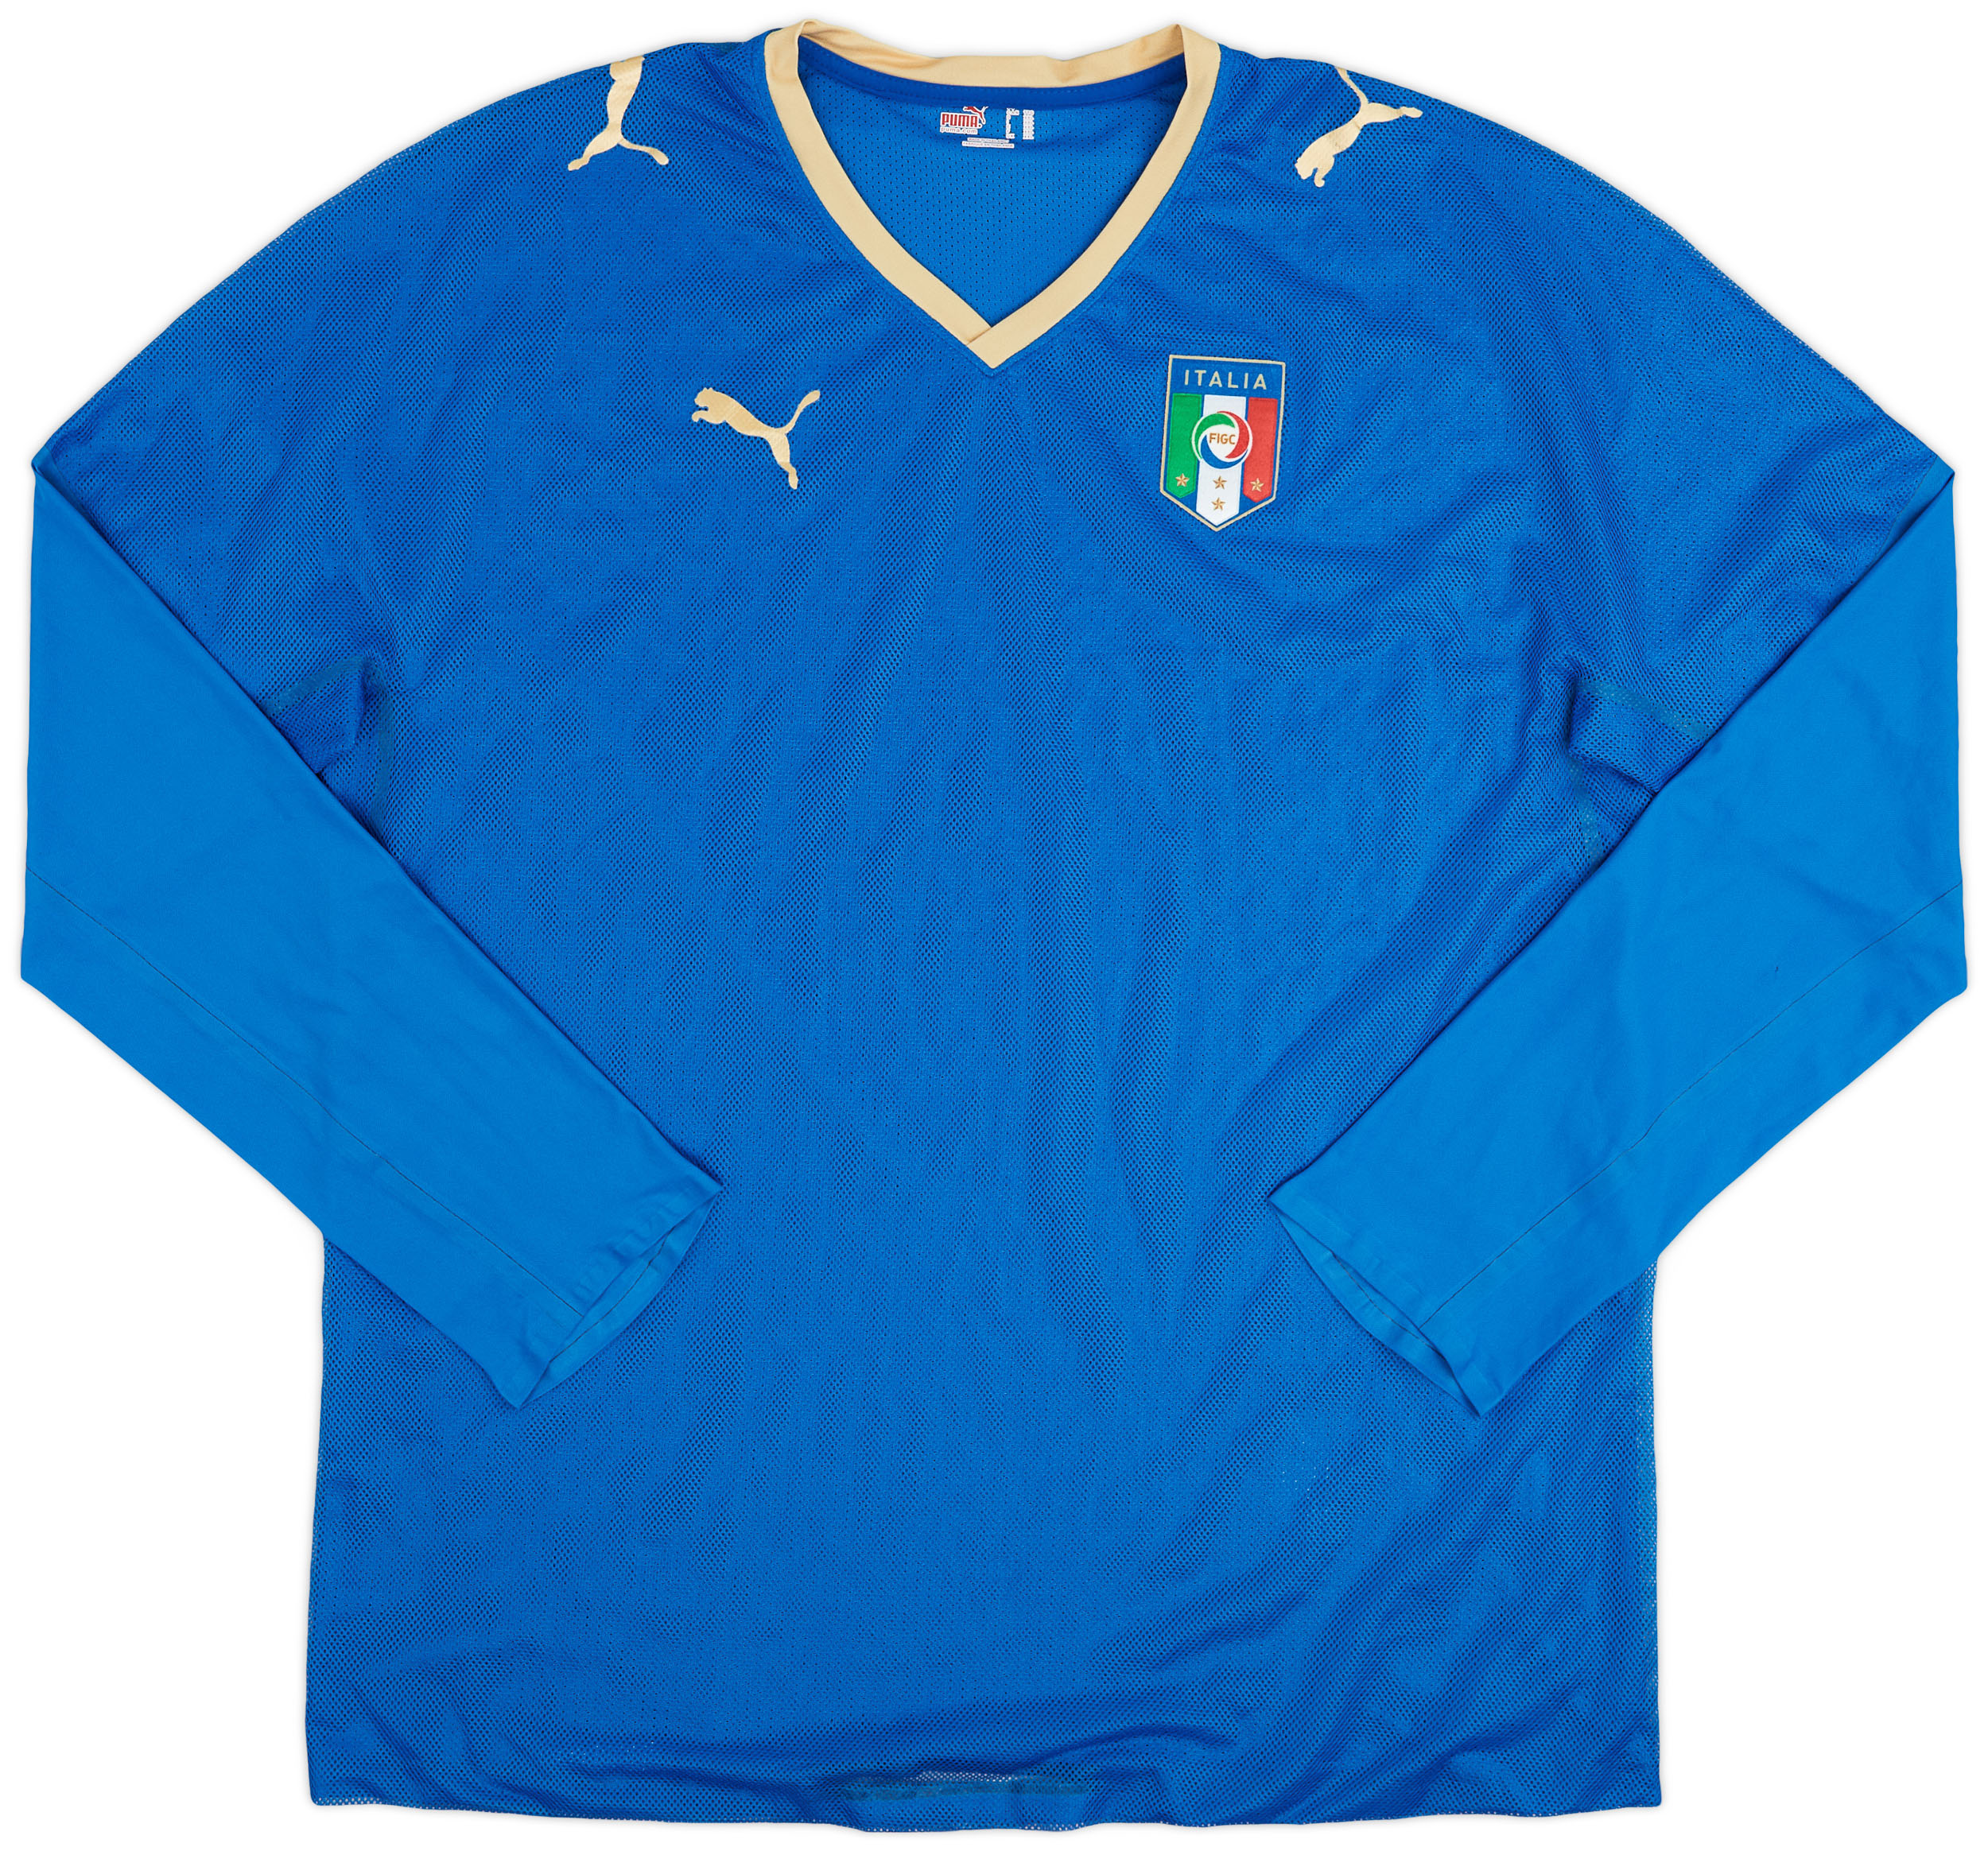 2007-08 Italy Player Issue Home Shirt - 9/10 - ()